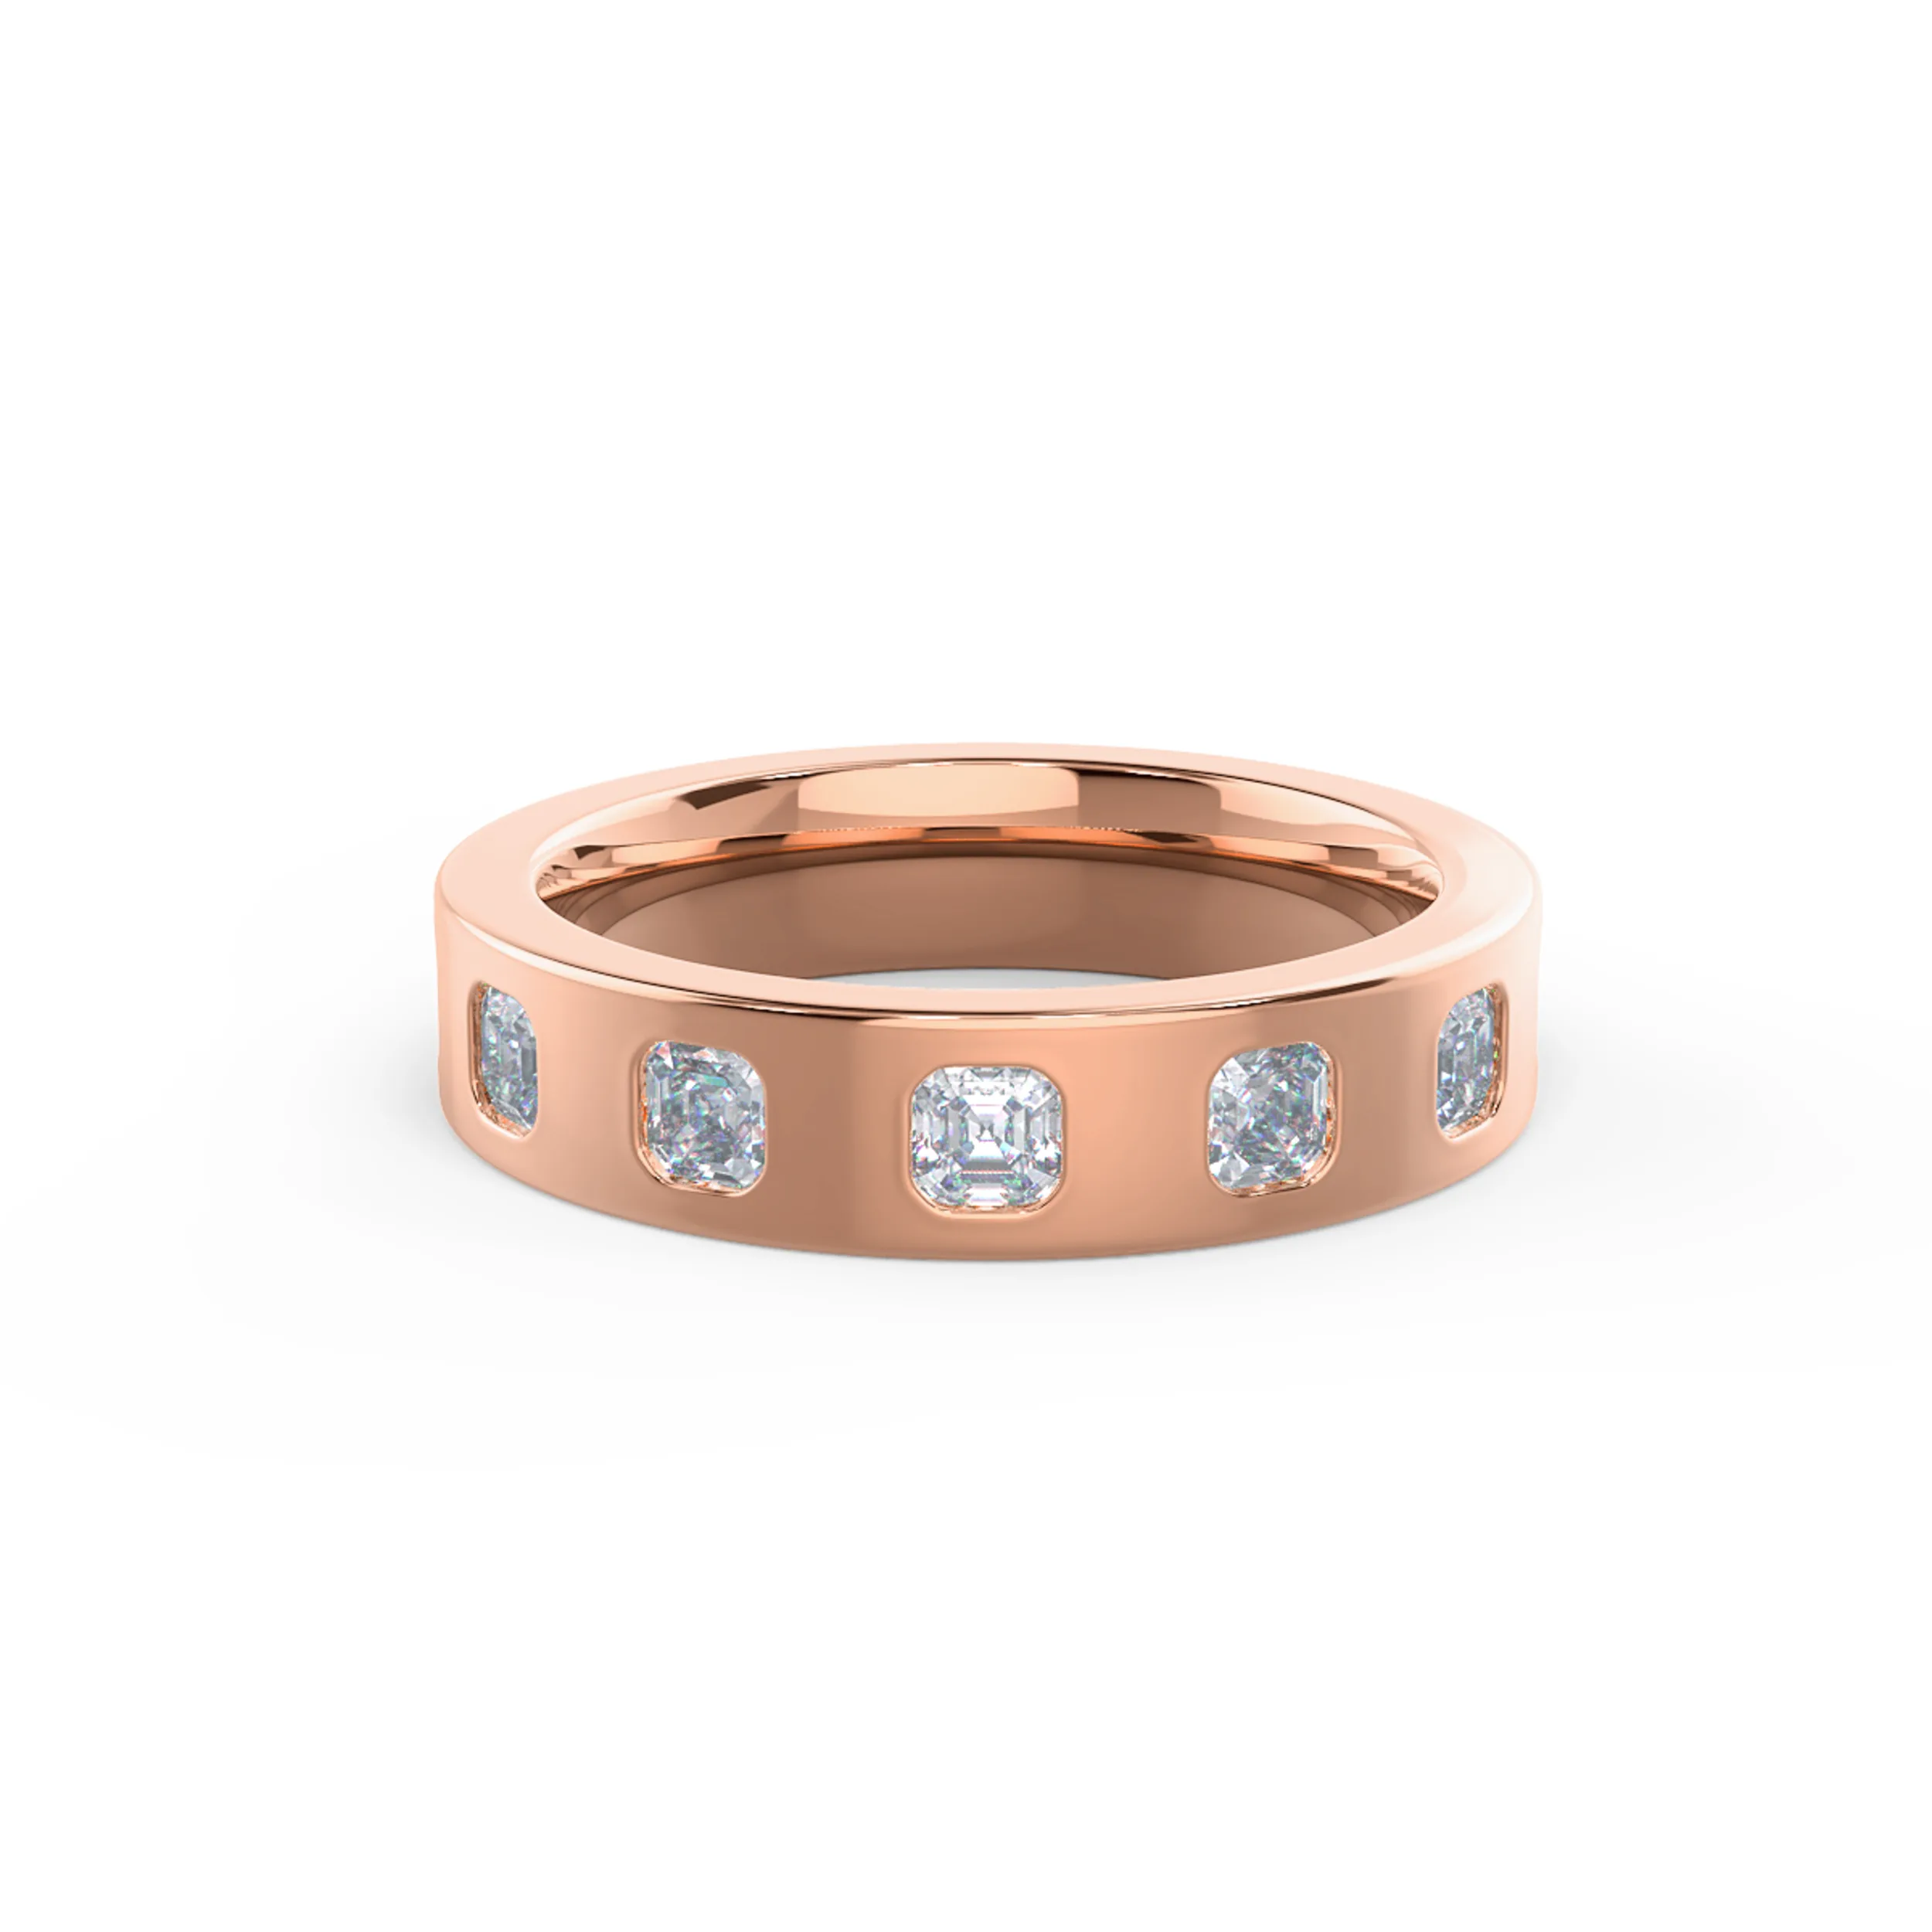 Hand Selected 1.4 ct Lab Created Diamonds Asscher Flush Set Seven Stone in 14k Rose Gold (Main View)